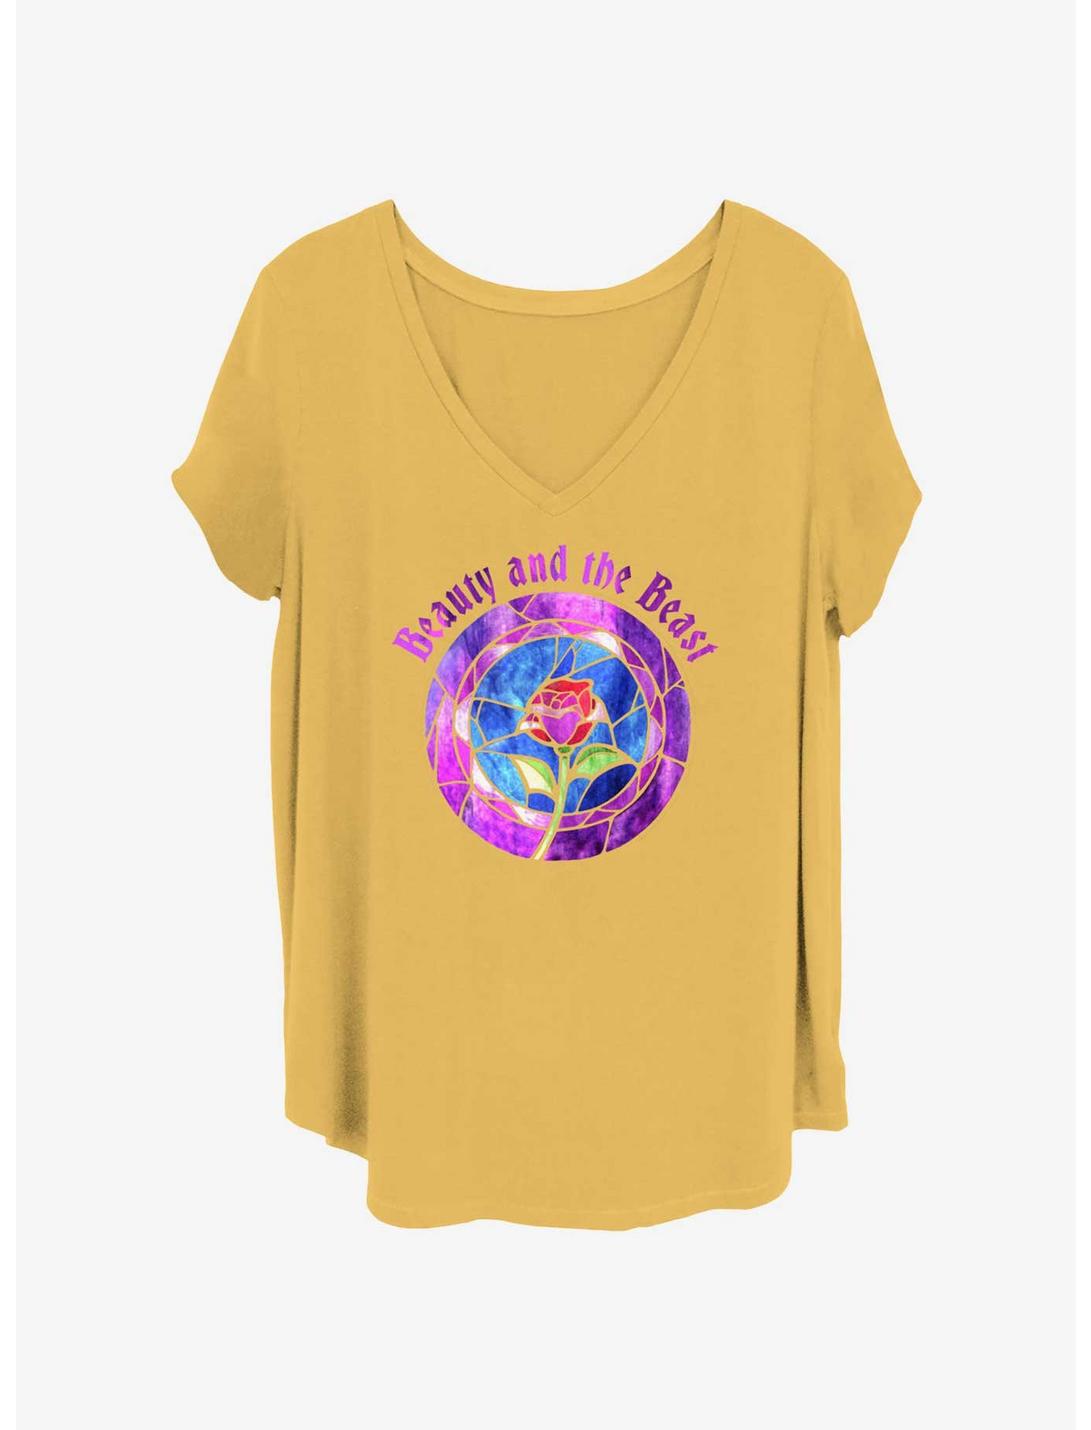 Disney Beauty and the Beast Stained Glass Rose Badge Womens T-Shirt Plus Size, OCHRE, hi-res